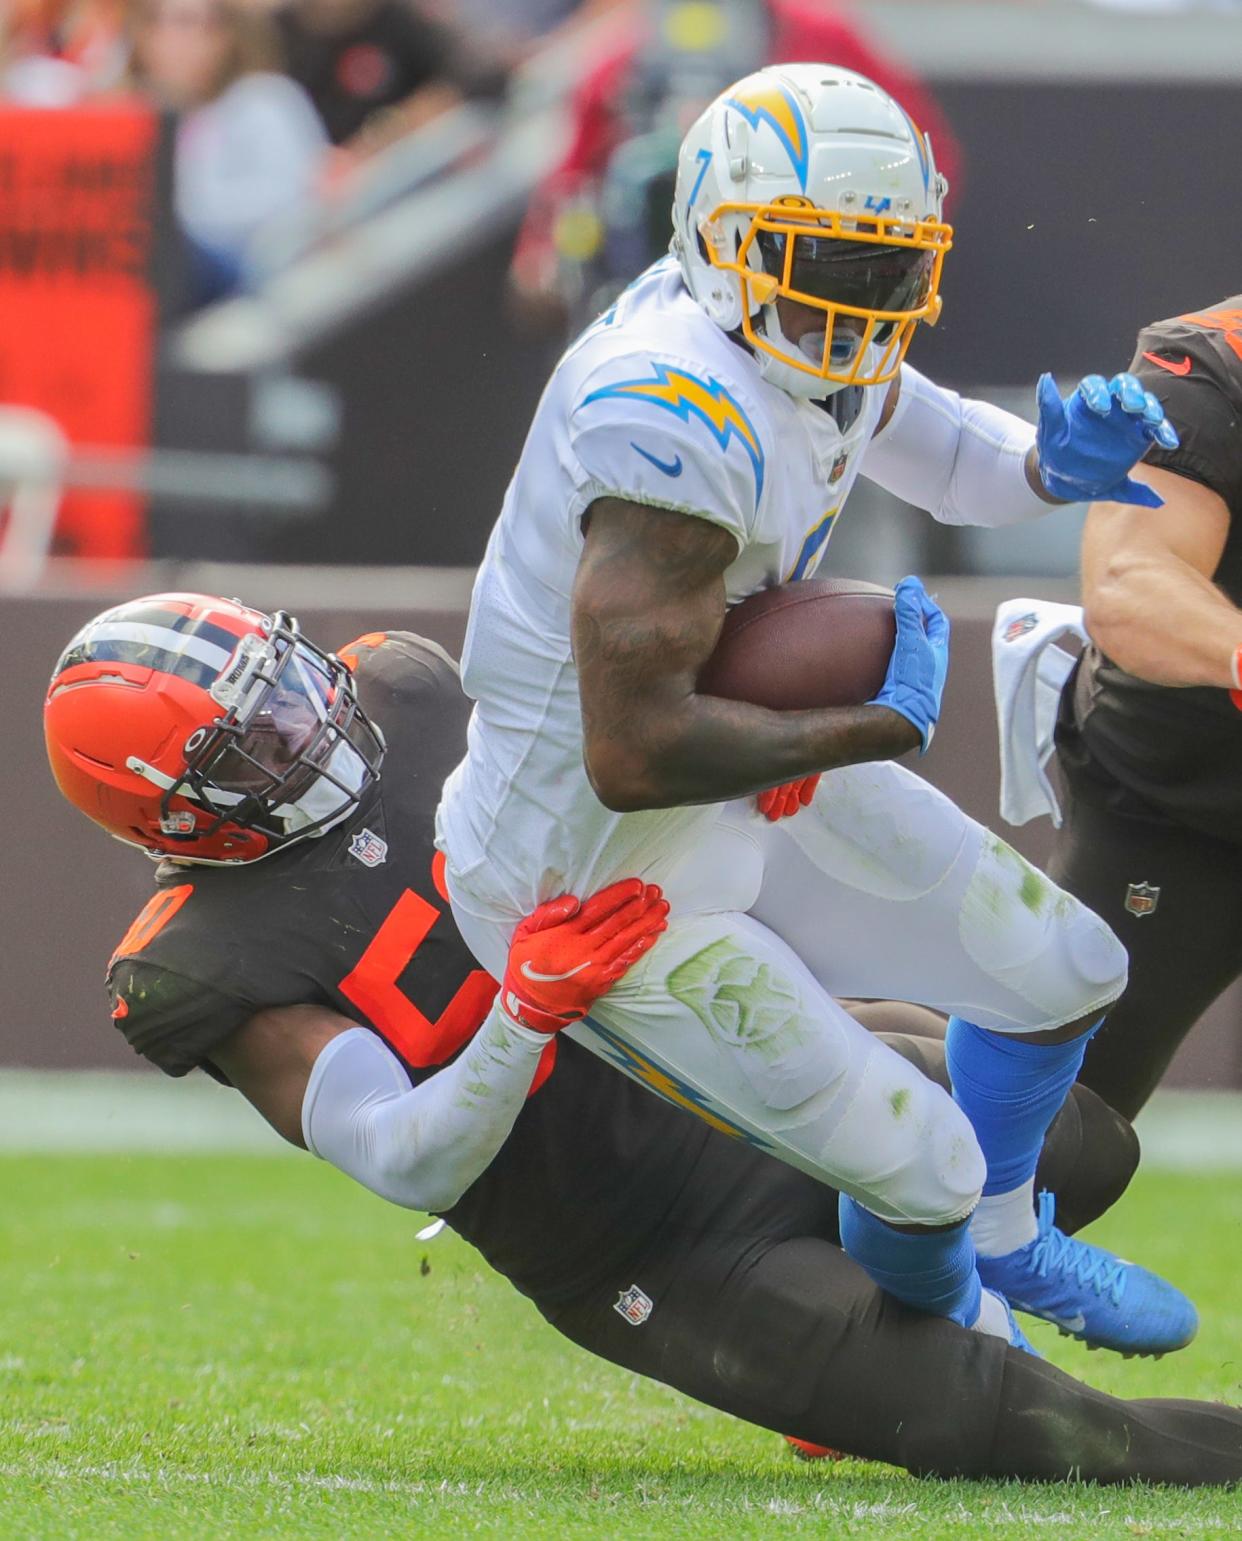 Browns linebacker Jacob Phillips takes down Chargers tight end Gerald Everett on Sunday, Oct. 9, 2022 in Cleveland.